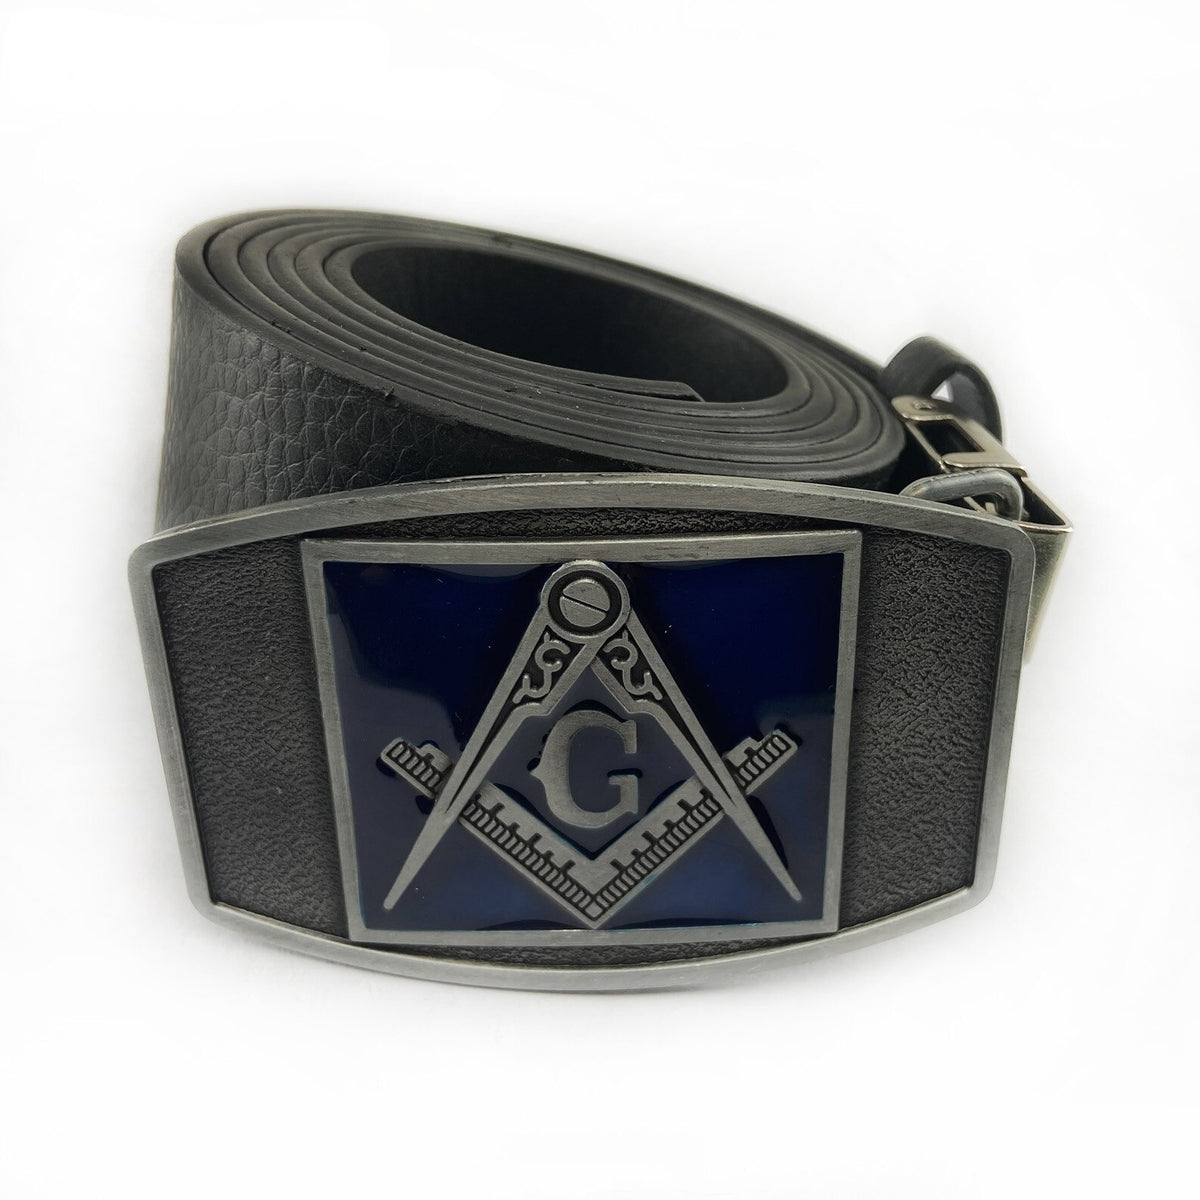 Masonic Reversible Belt with two Buckles